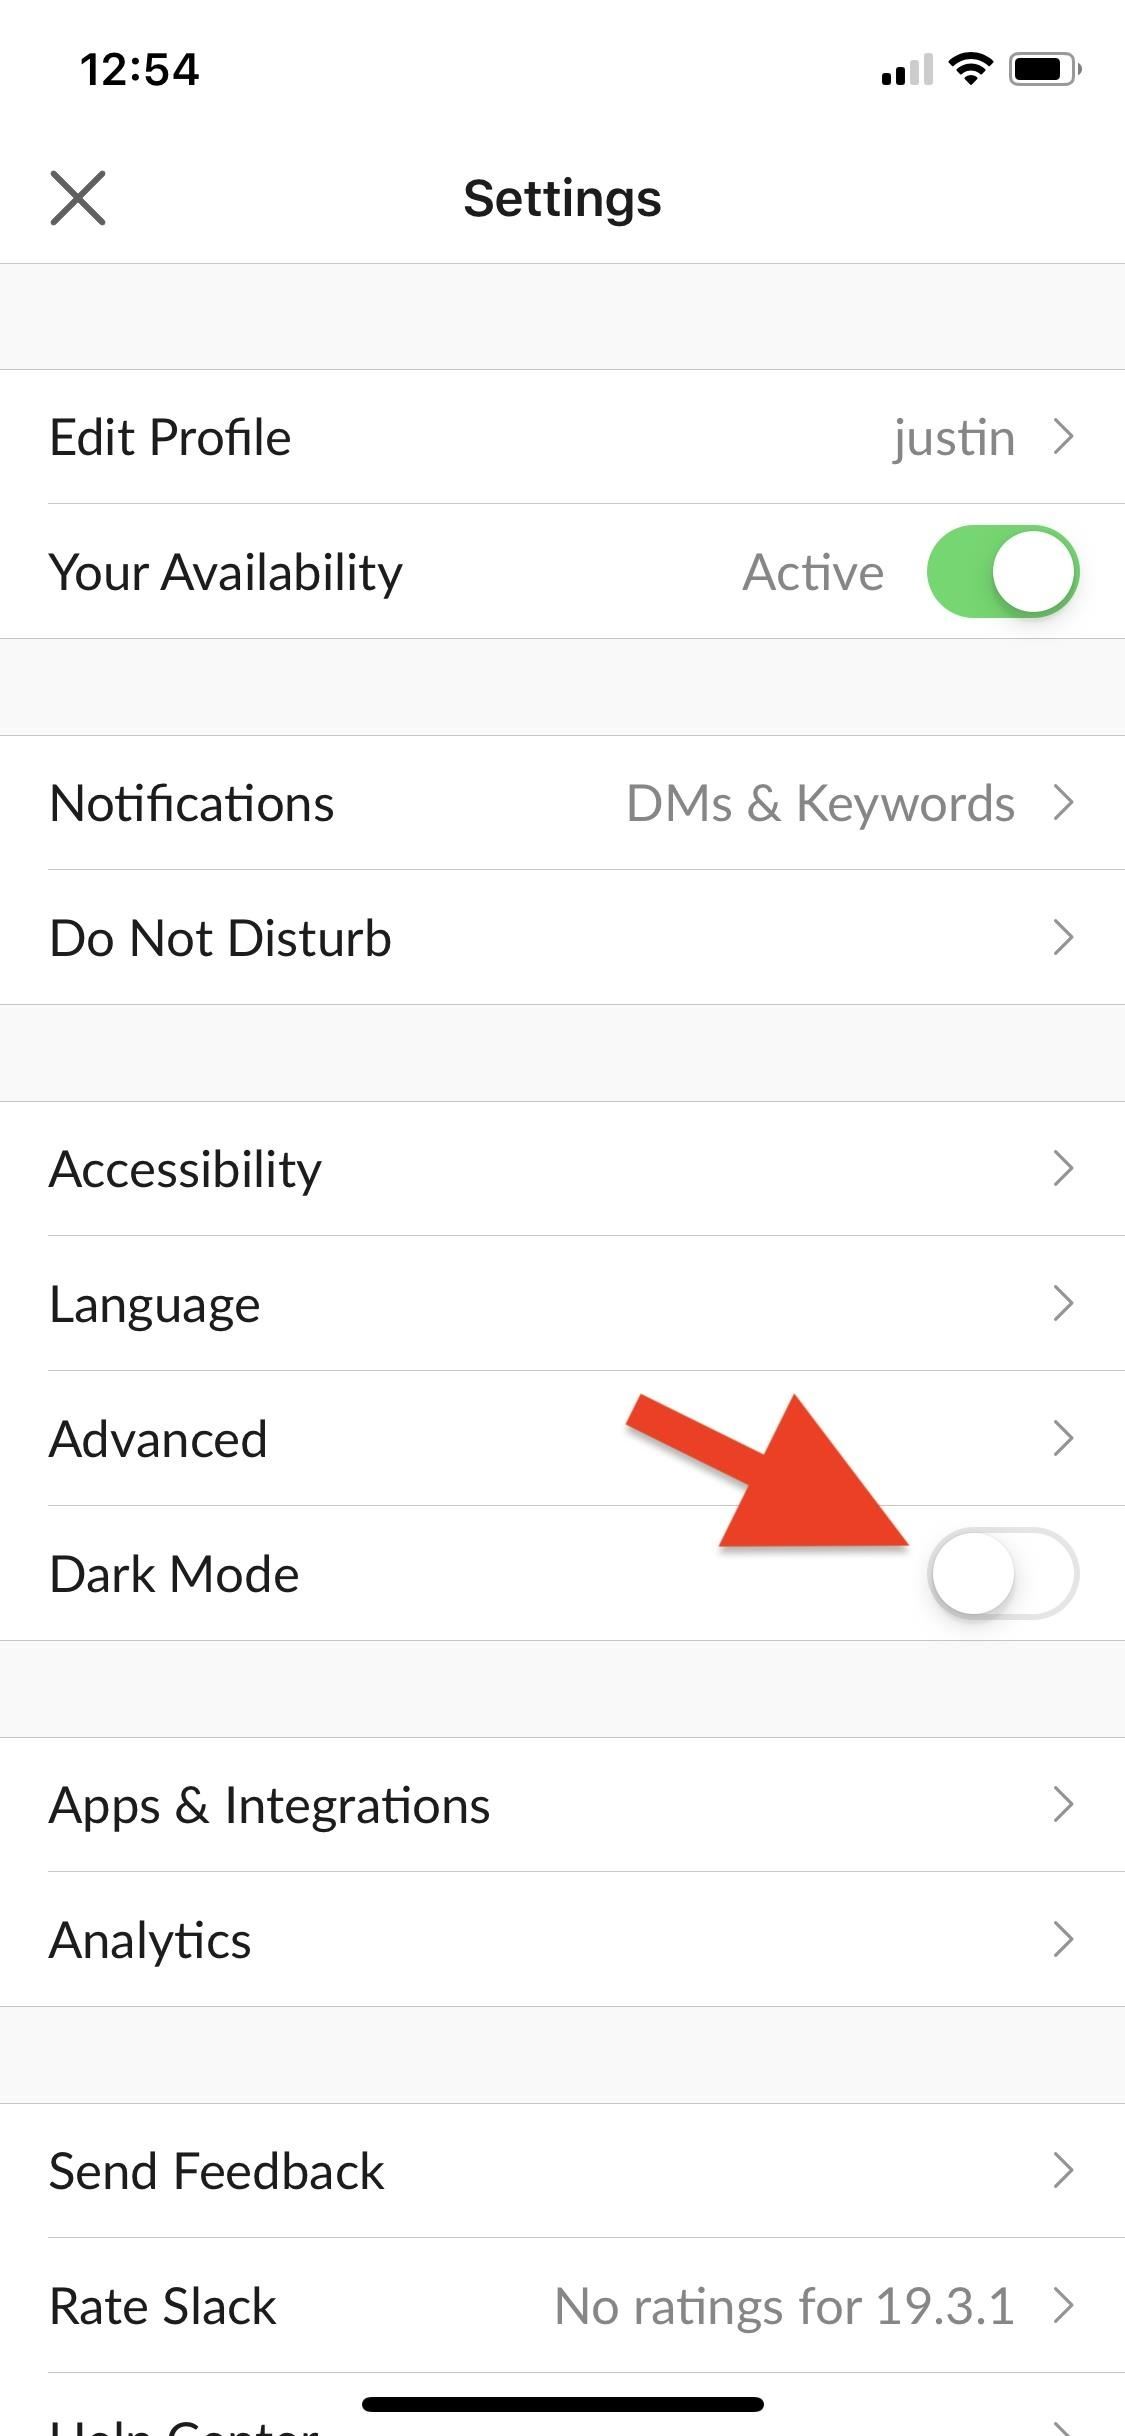 How to Get Dark Mode in Slack on Your iPhone or Android Phone